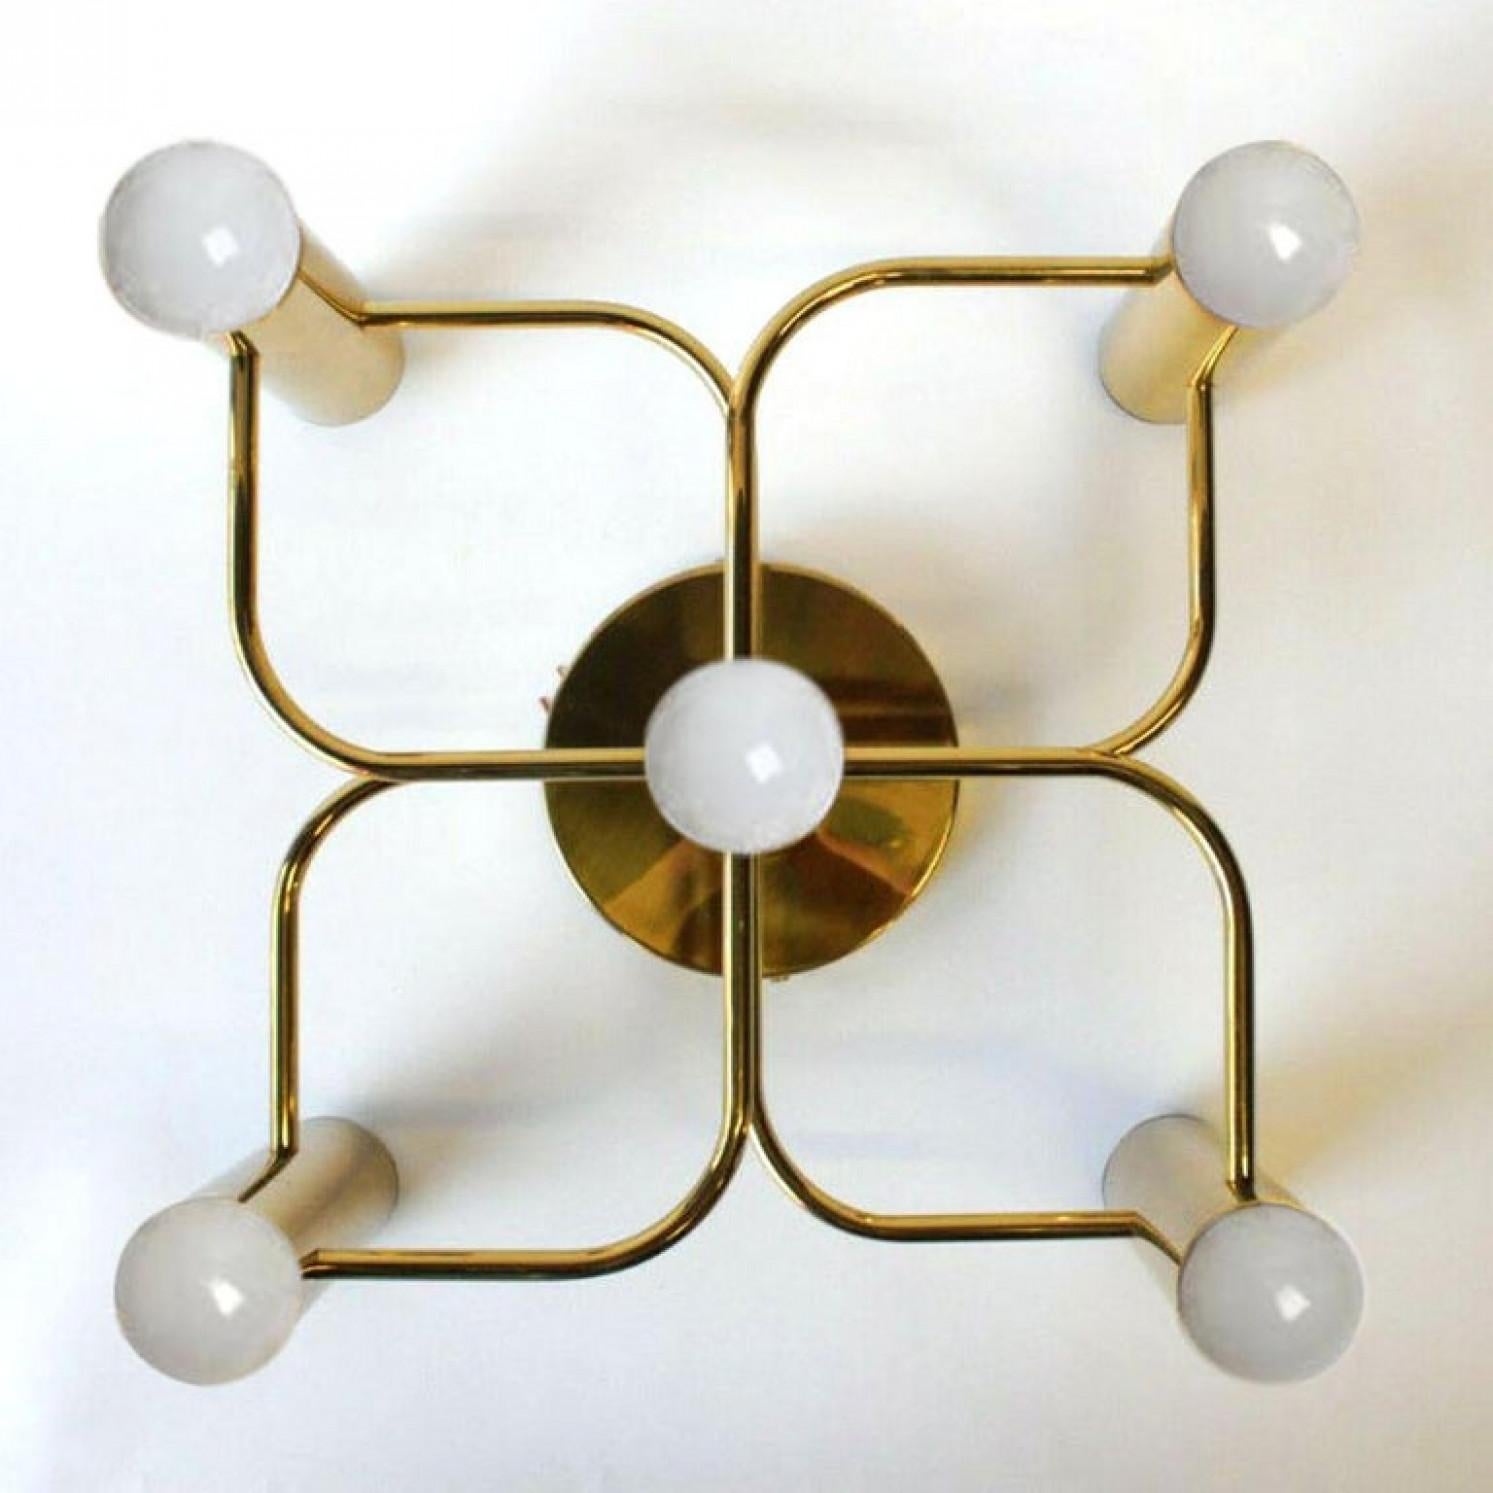 1 of the 4 Leola Sculptural Brass 5-Light Ceiling or Wall Flush Mount, 1970s In Good Condition For Sale In Rijssen, NL